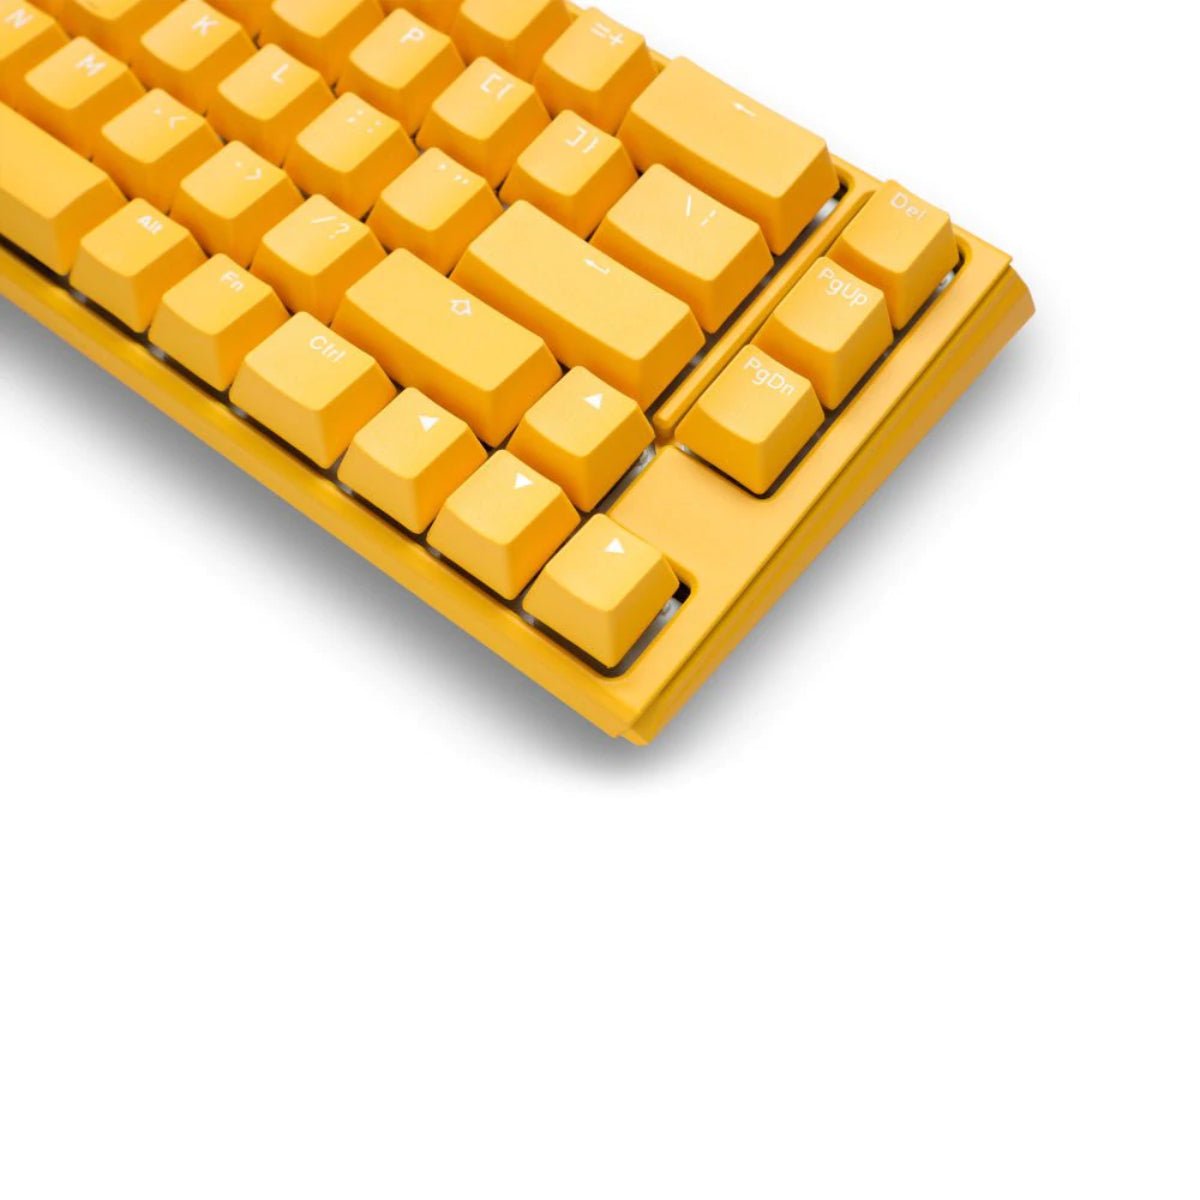 Ducky One 3 SF Yellow Case 65% RGB Mechanical Keyboard - Black Switch - Store 974 | ستور ٩٧٤